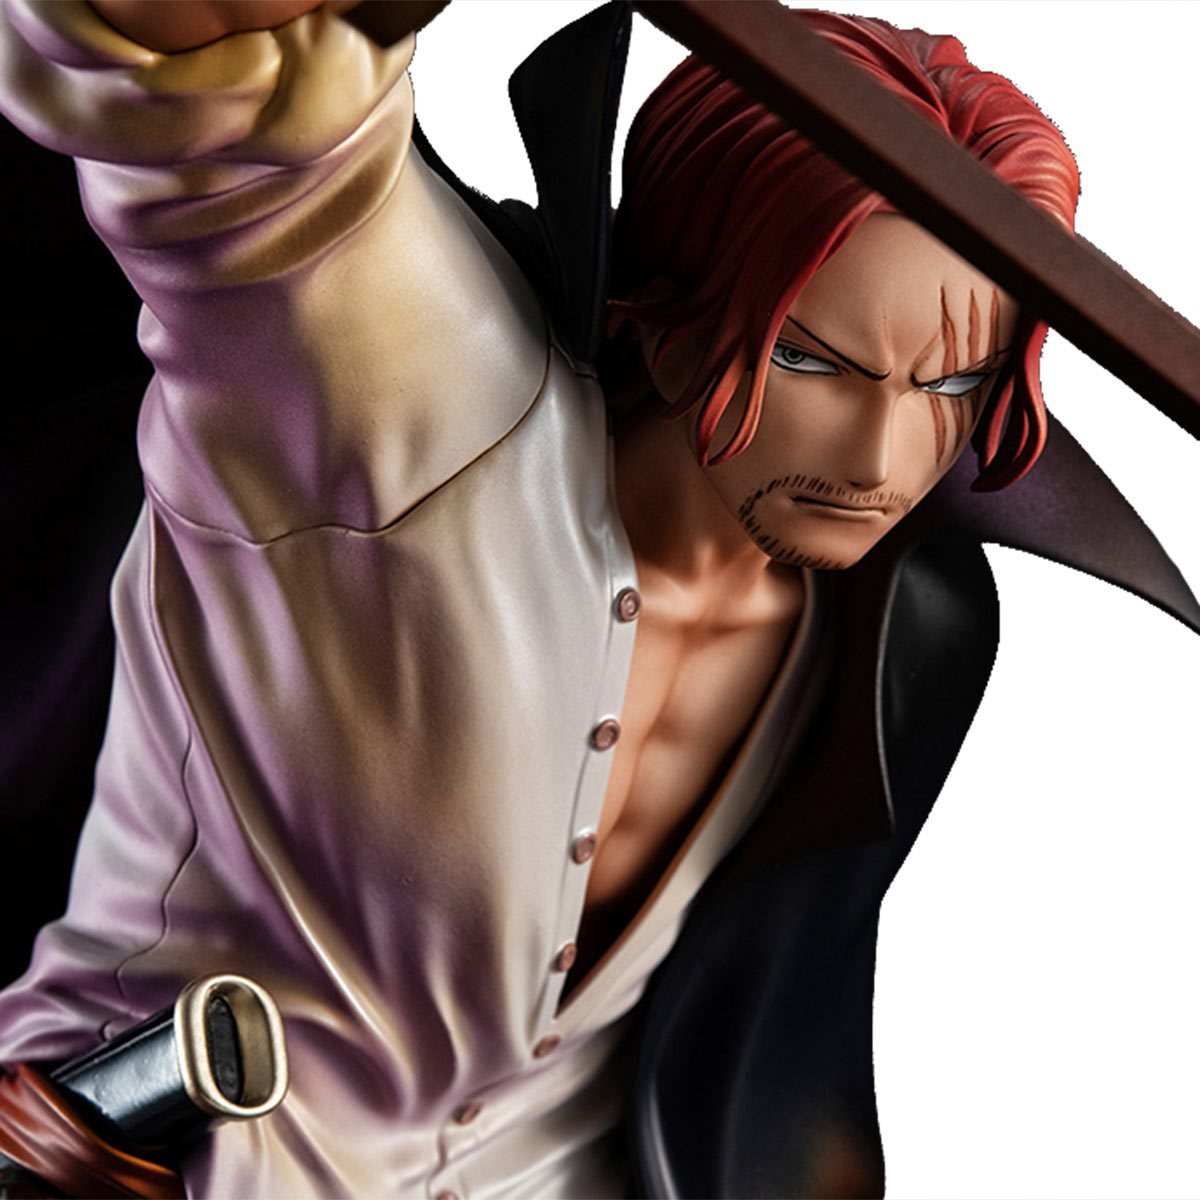 Backpack One Piece: Red - Red-Haired Shanks